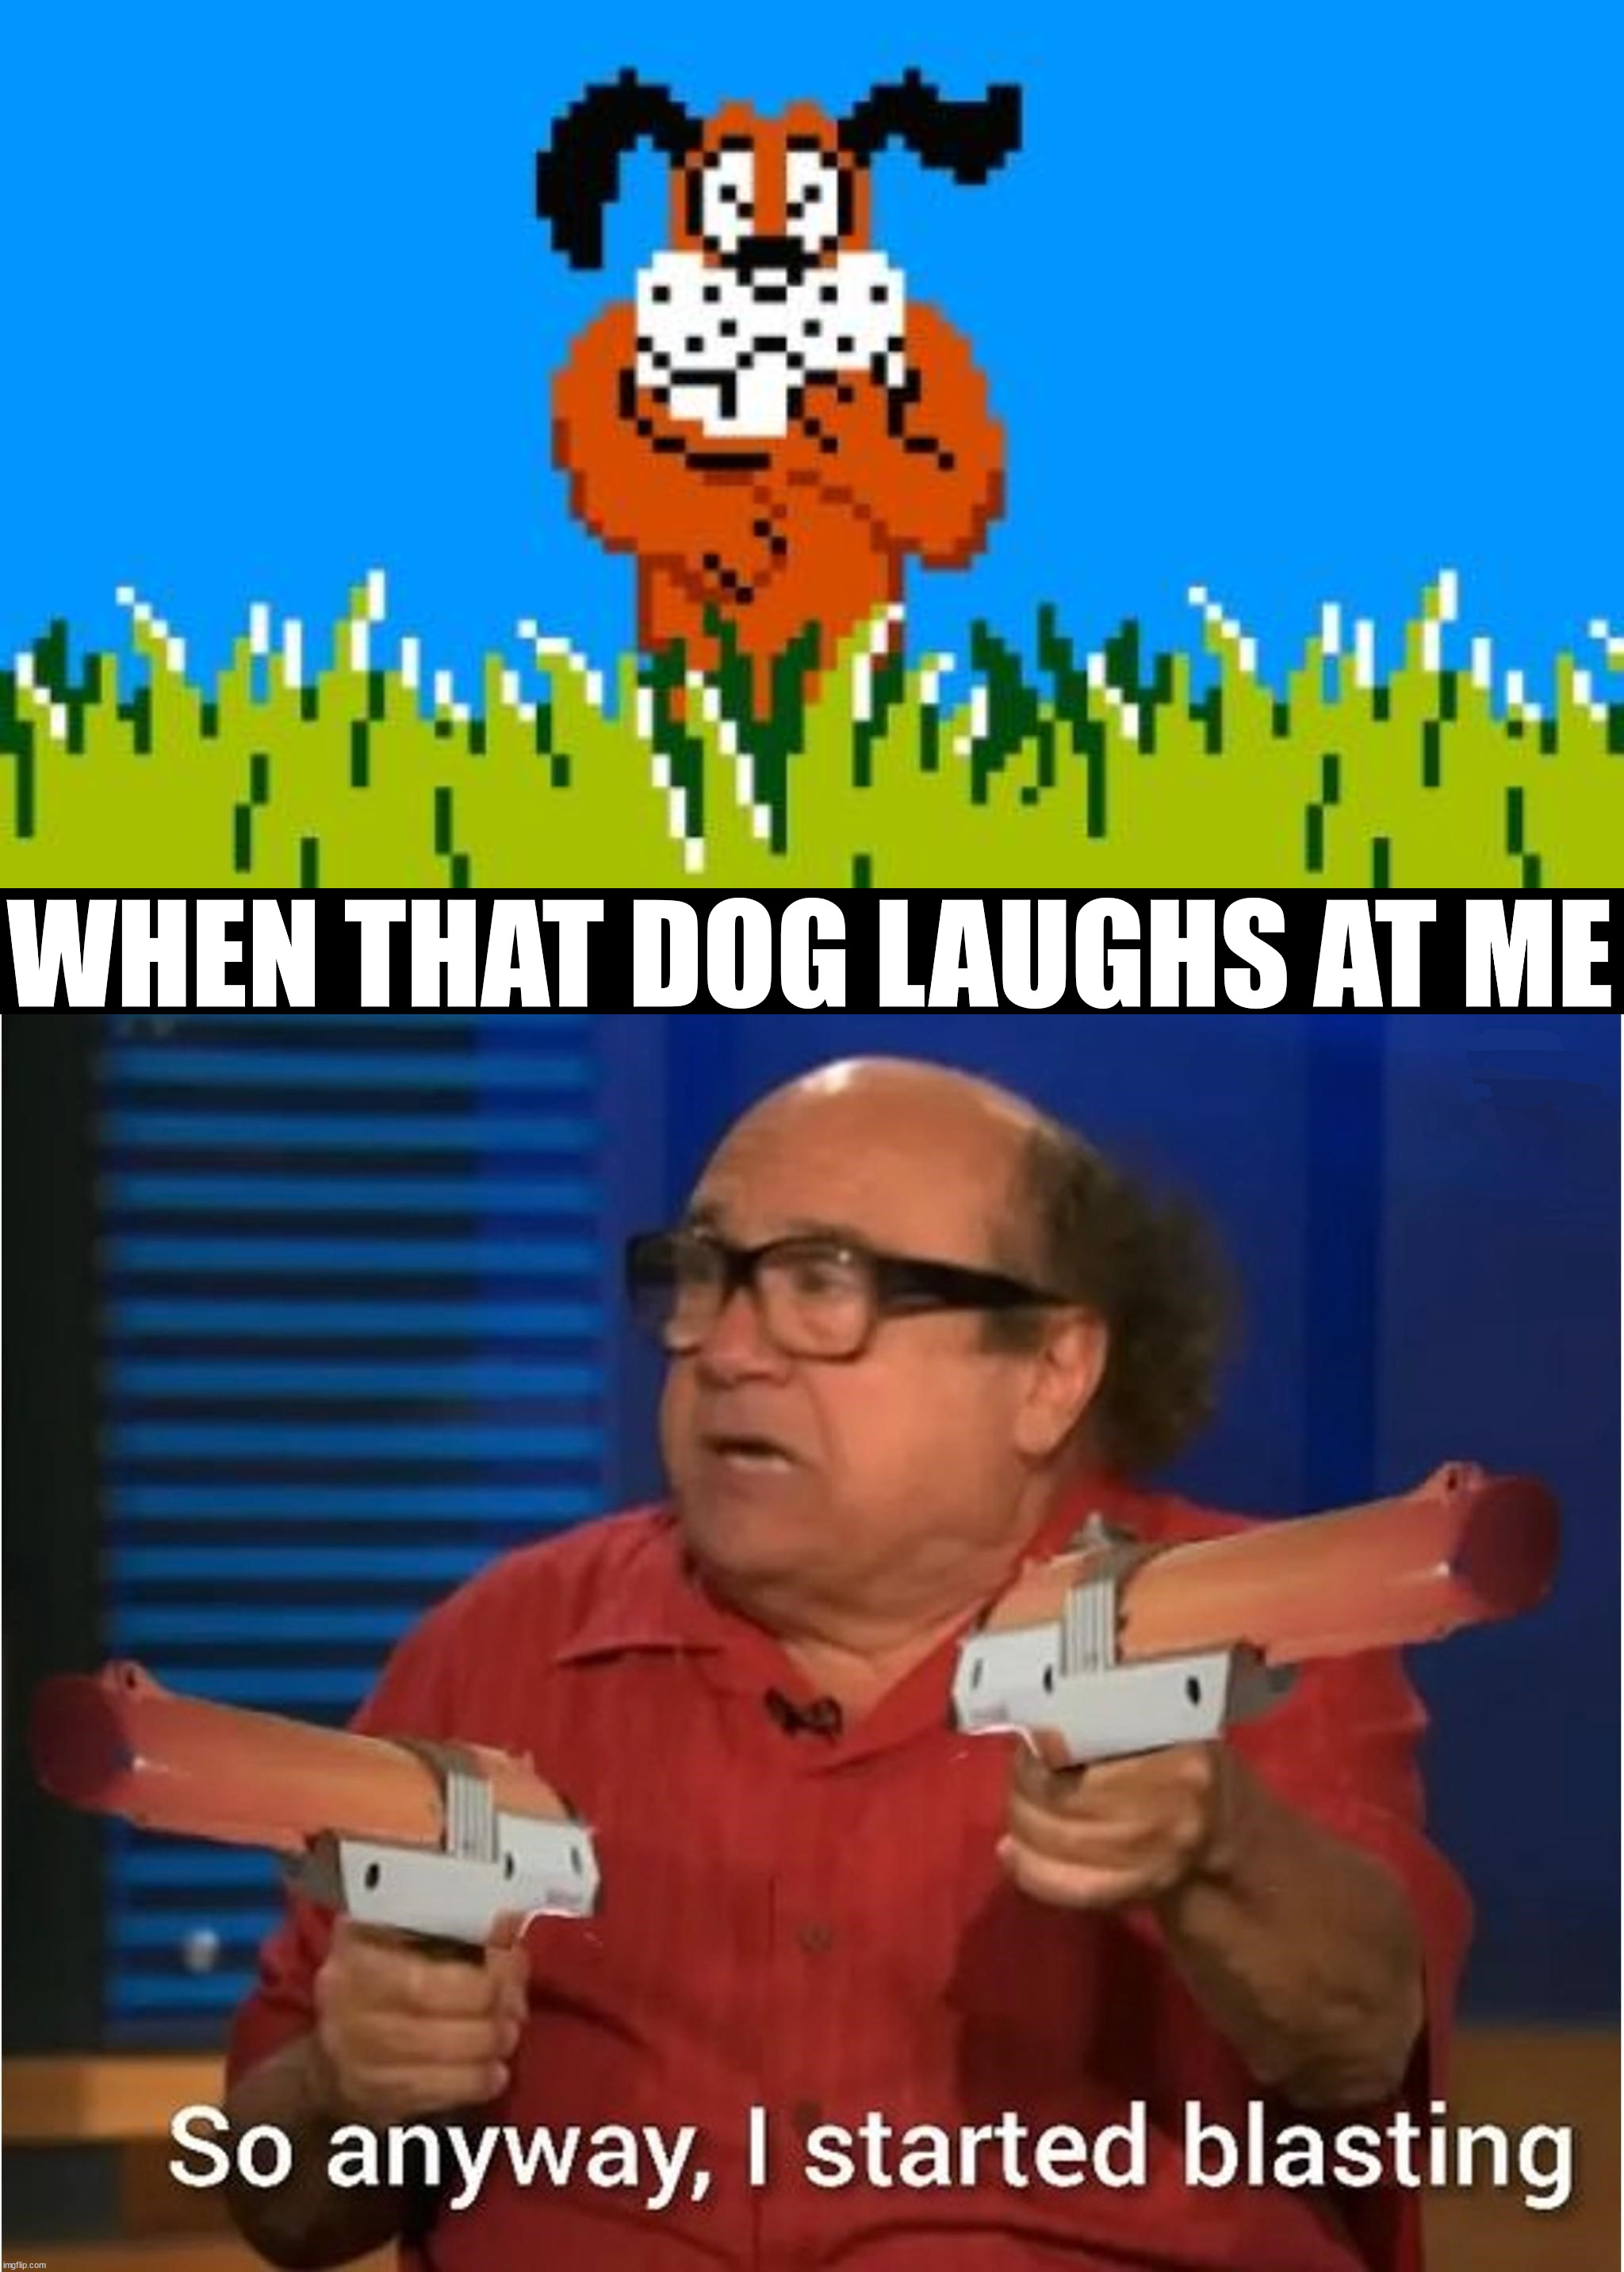 Had enough of that dog laughing at me | WHEN THAT DOG LAUGHS AT ME | image tagged in duck hunt dog | made w/ Imgflip meme maker